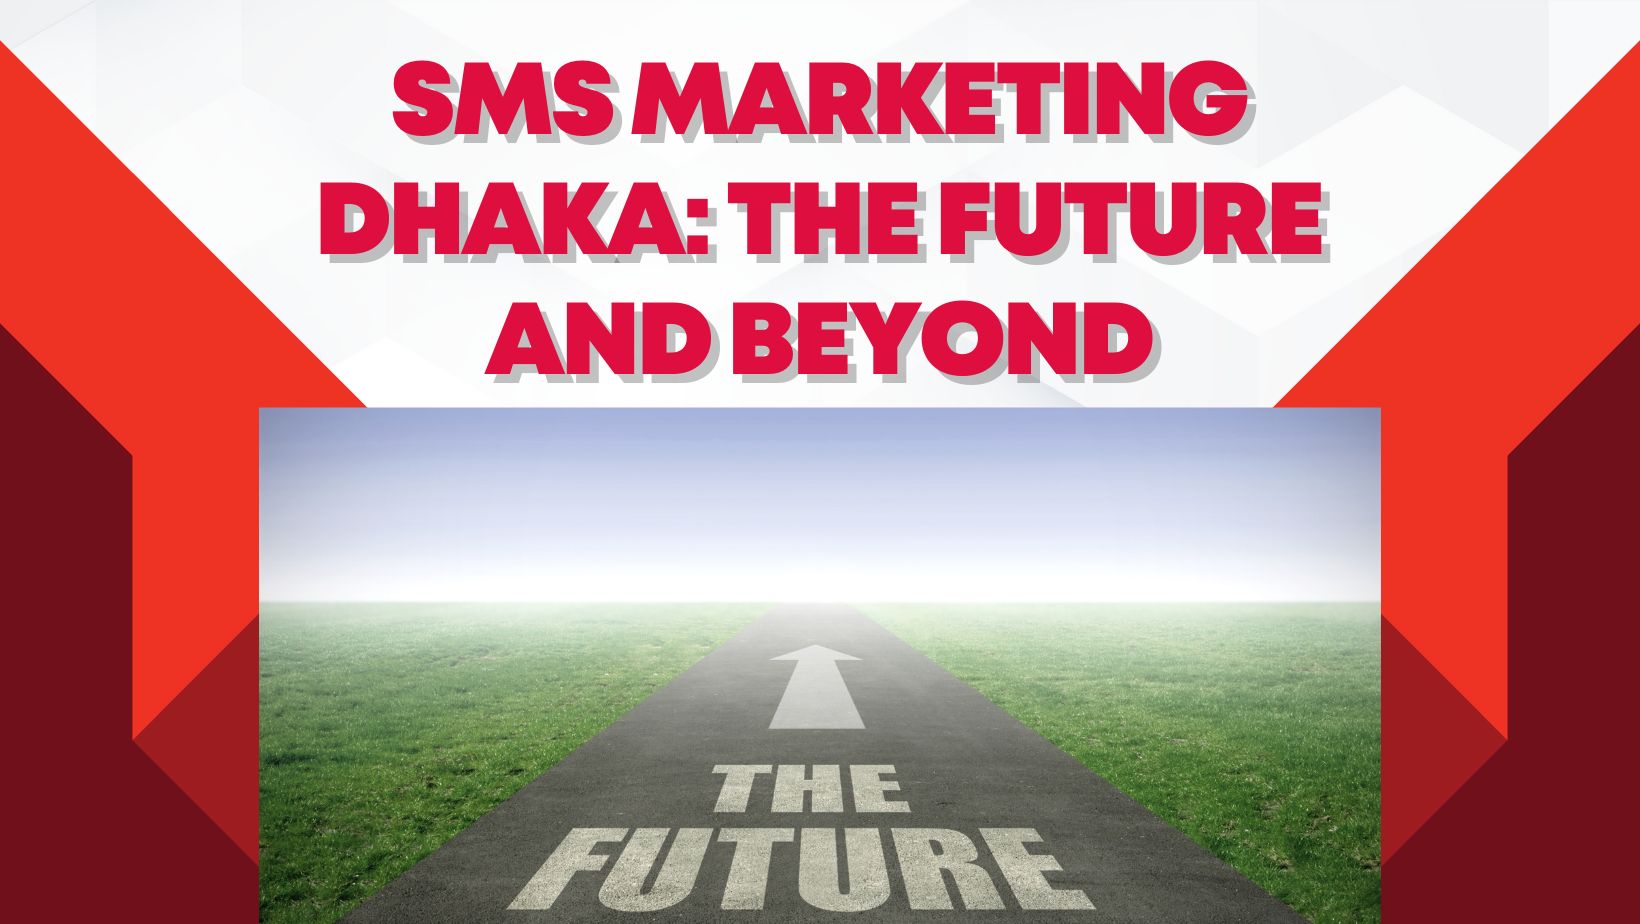 SMS Marketing Dhaka: The Future and Beyond